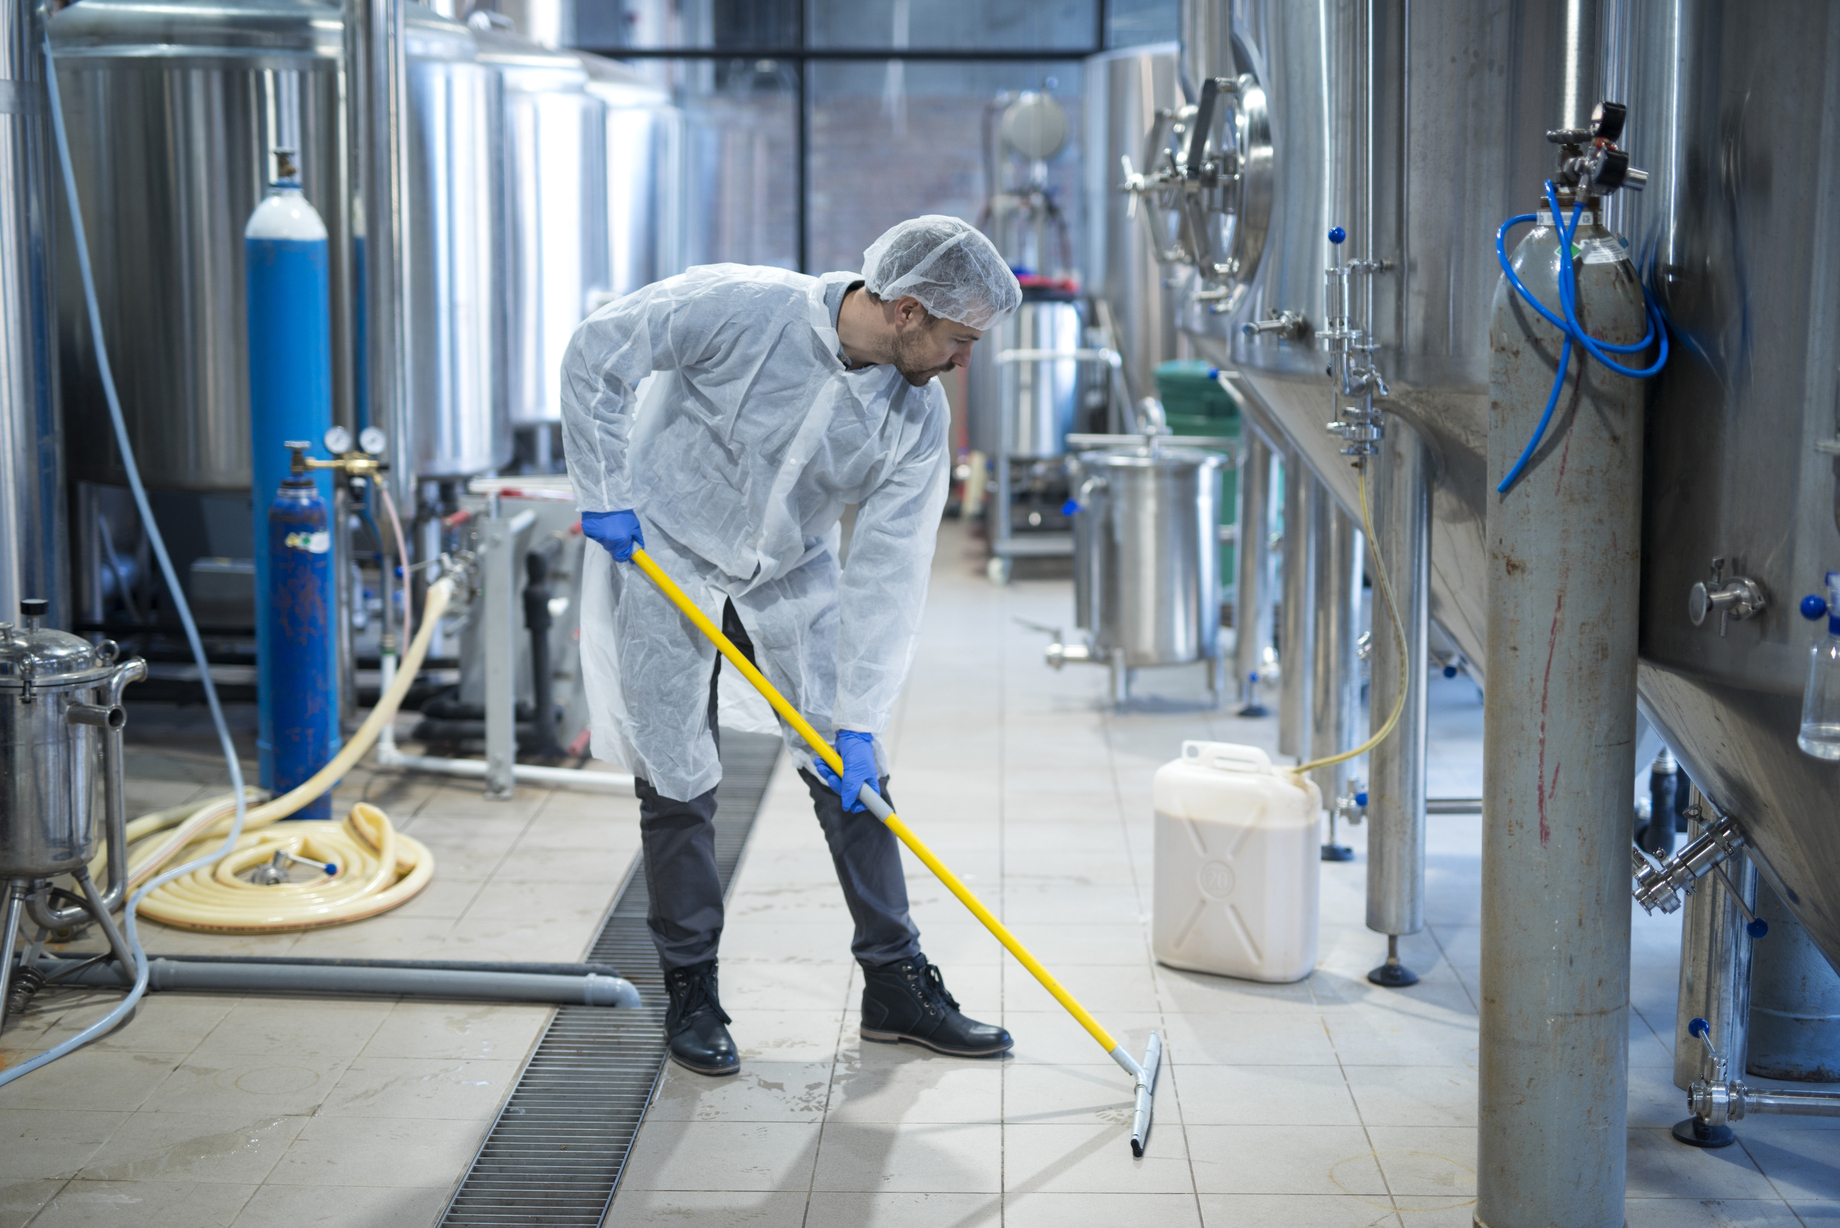 professional-industrial-cleaner-protective-uniform-cleaning-floor-food-processing-plant (1) (1)